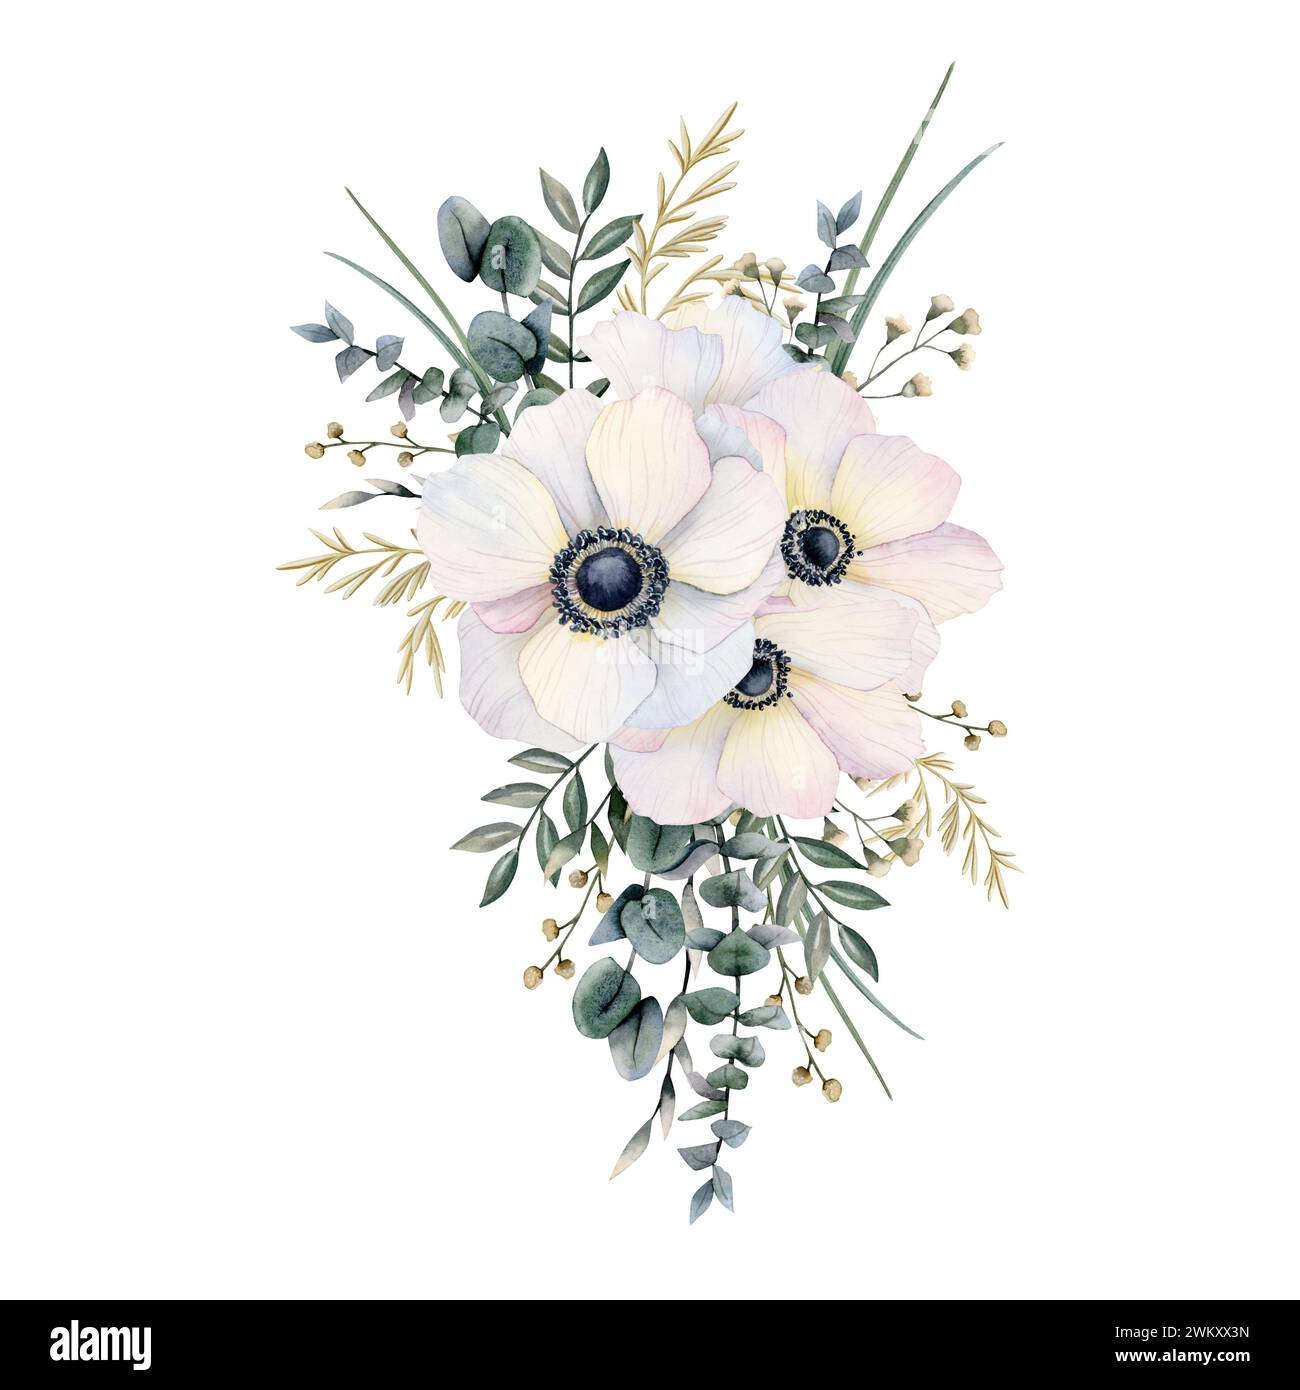 White anemones bouquet triangle composition with field poppies flowers, eucalyptus and grass watercolor illustration Stock Photo